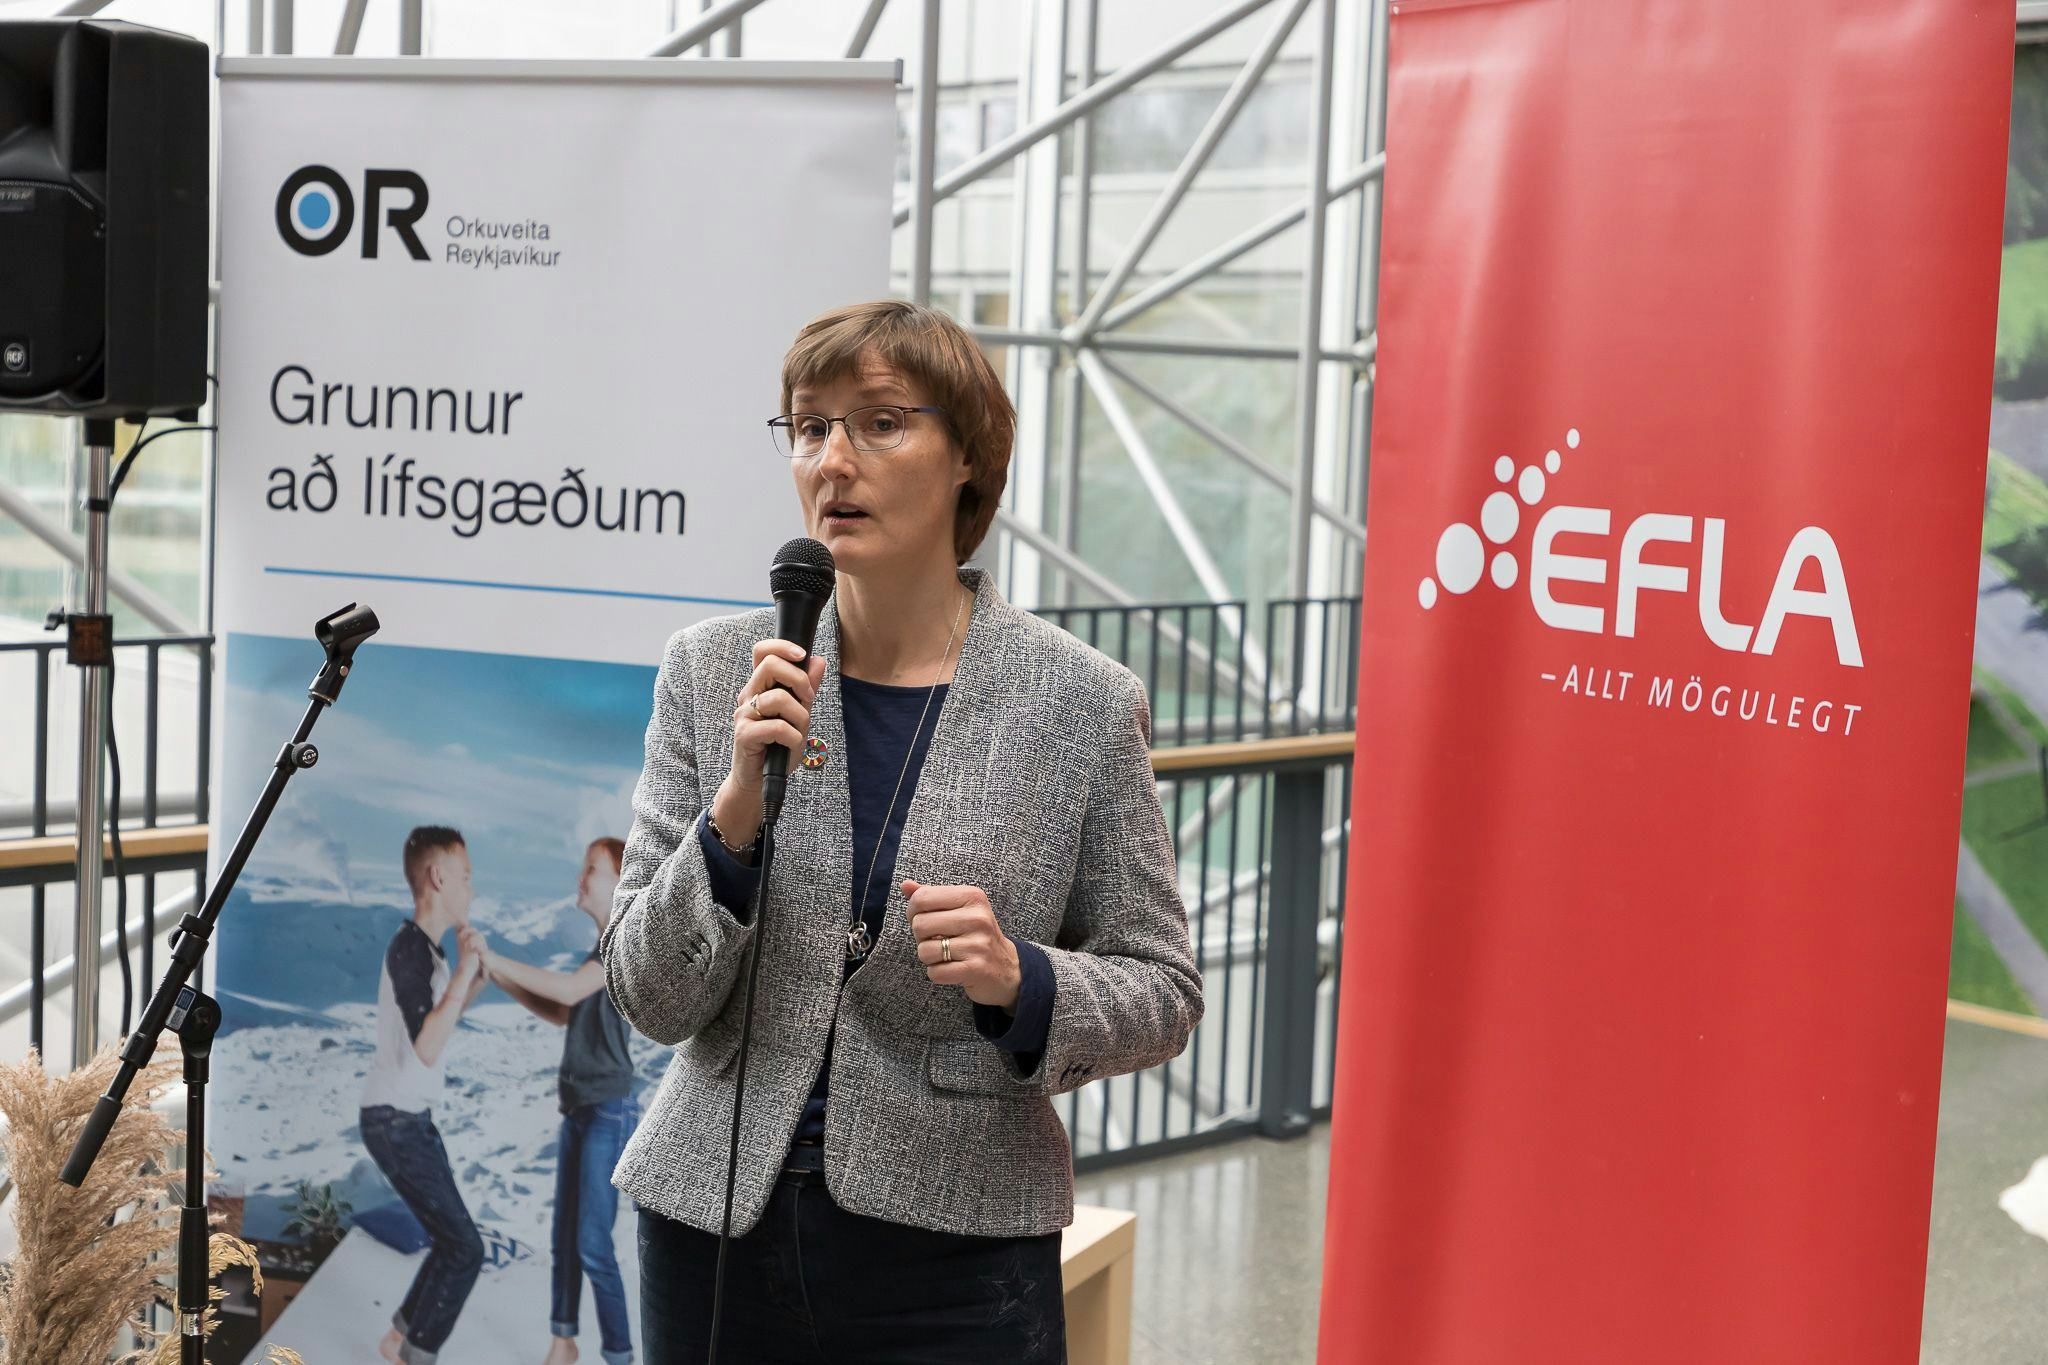 A woman speaking into a microphone in front of promotional banners